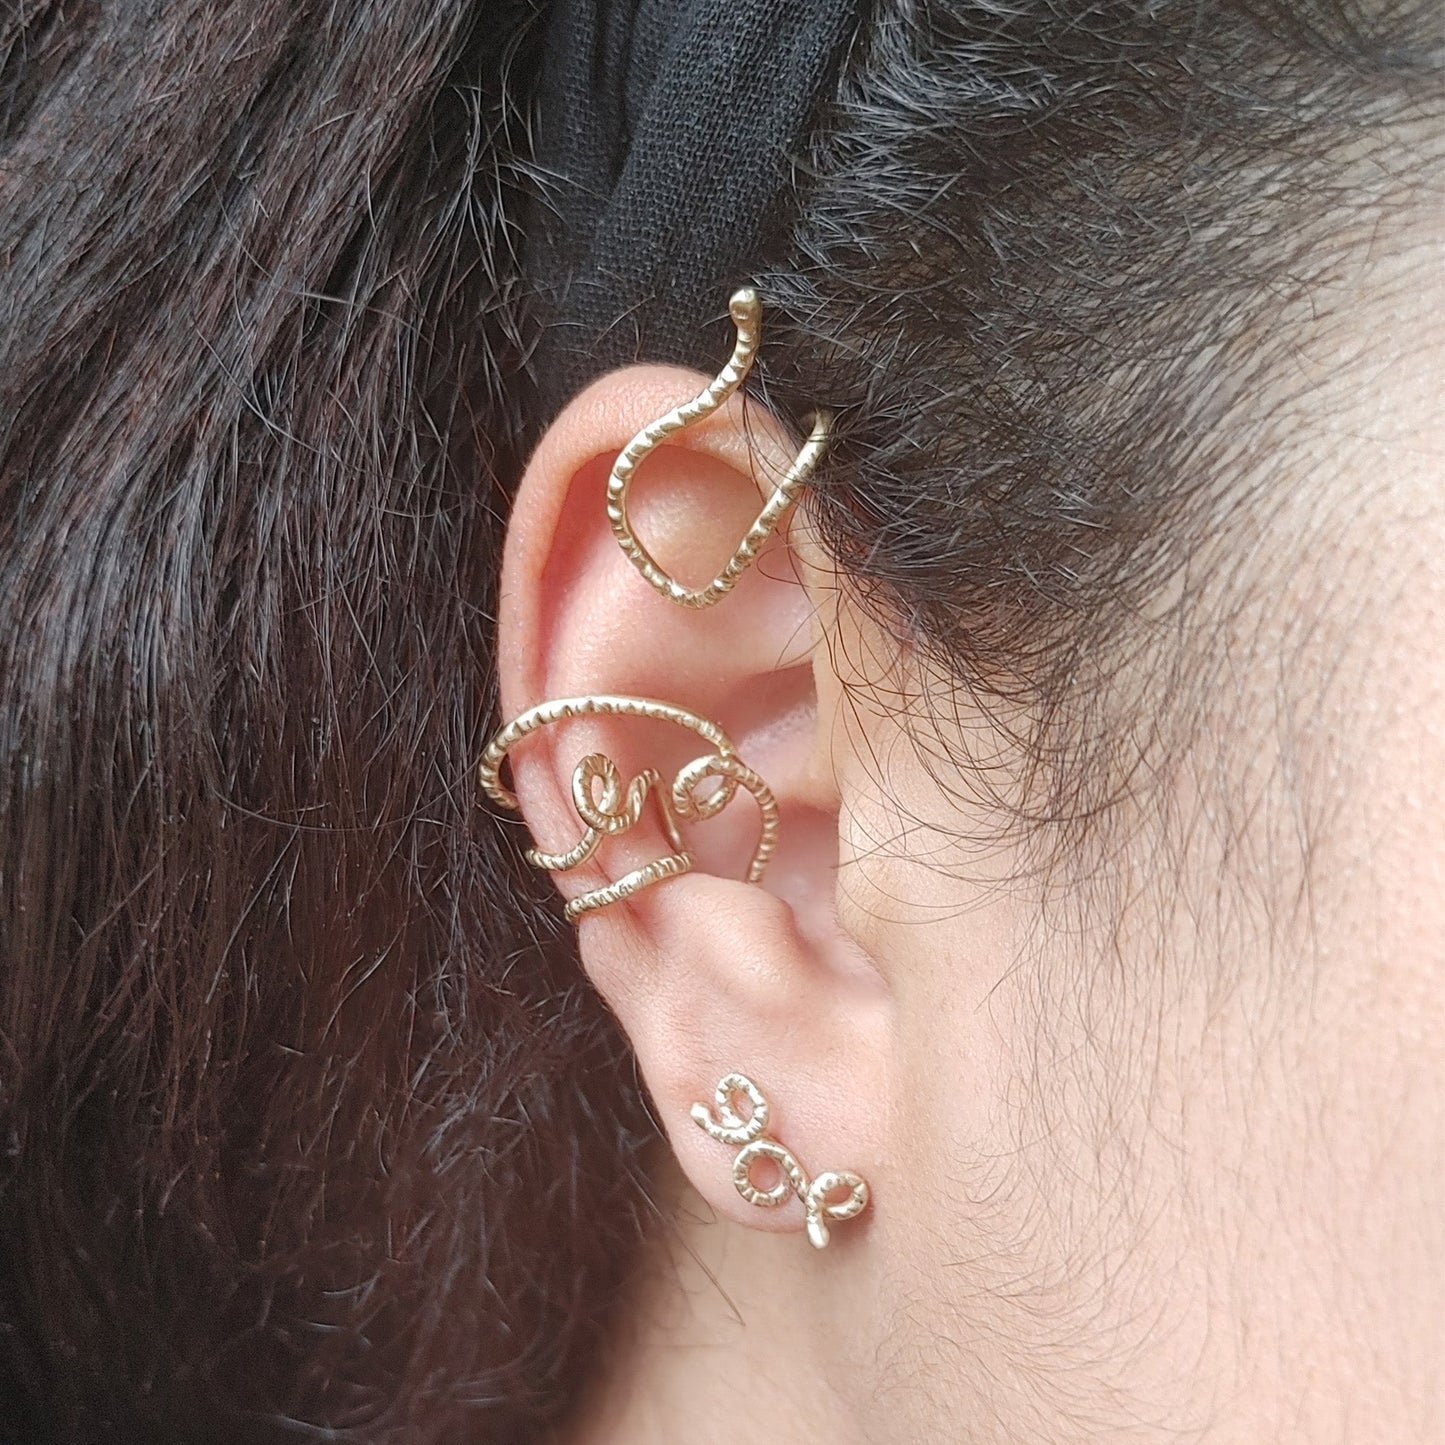 The Youth Partial Ear Cuff in Silver